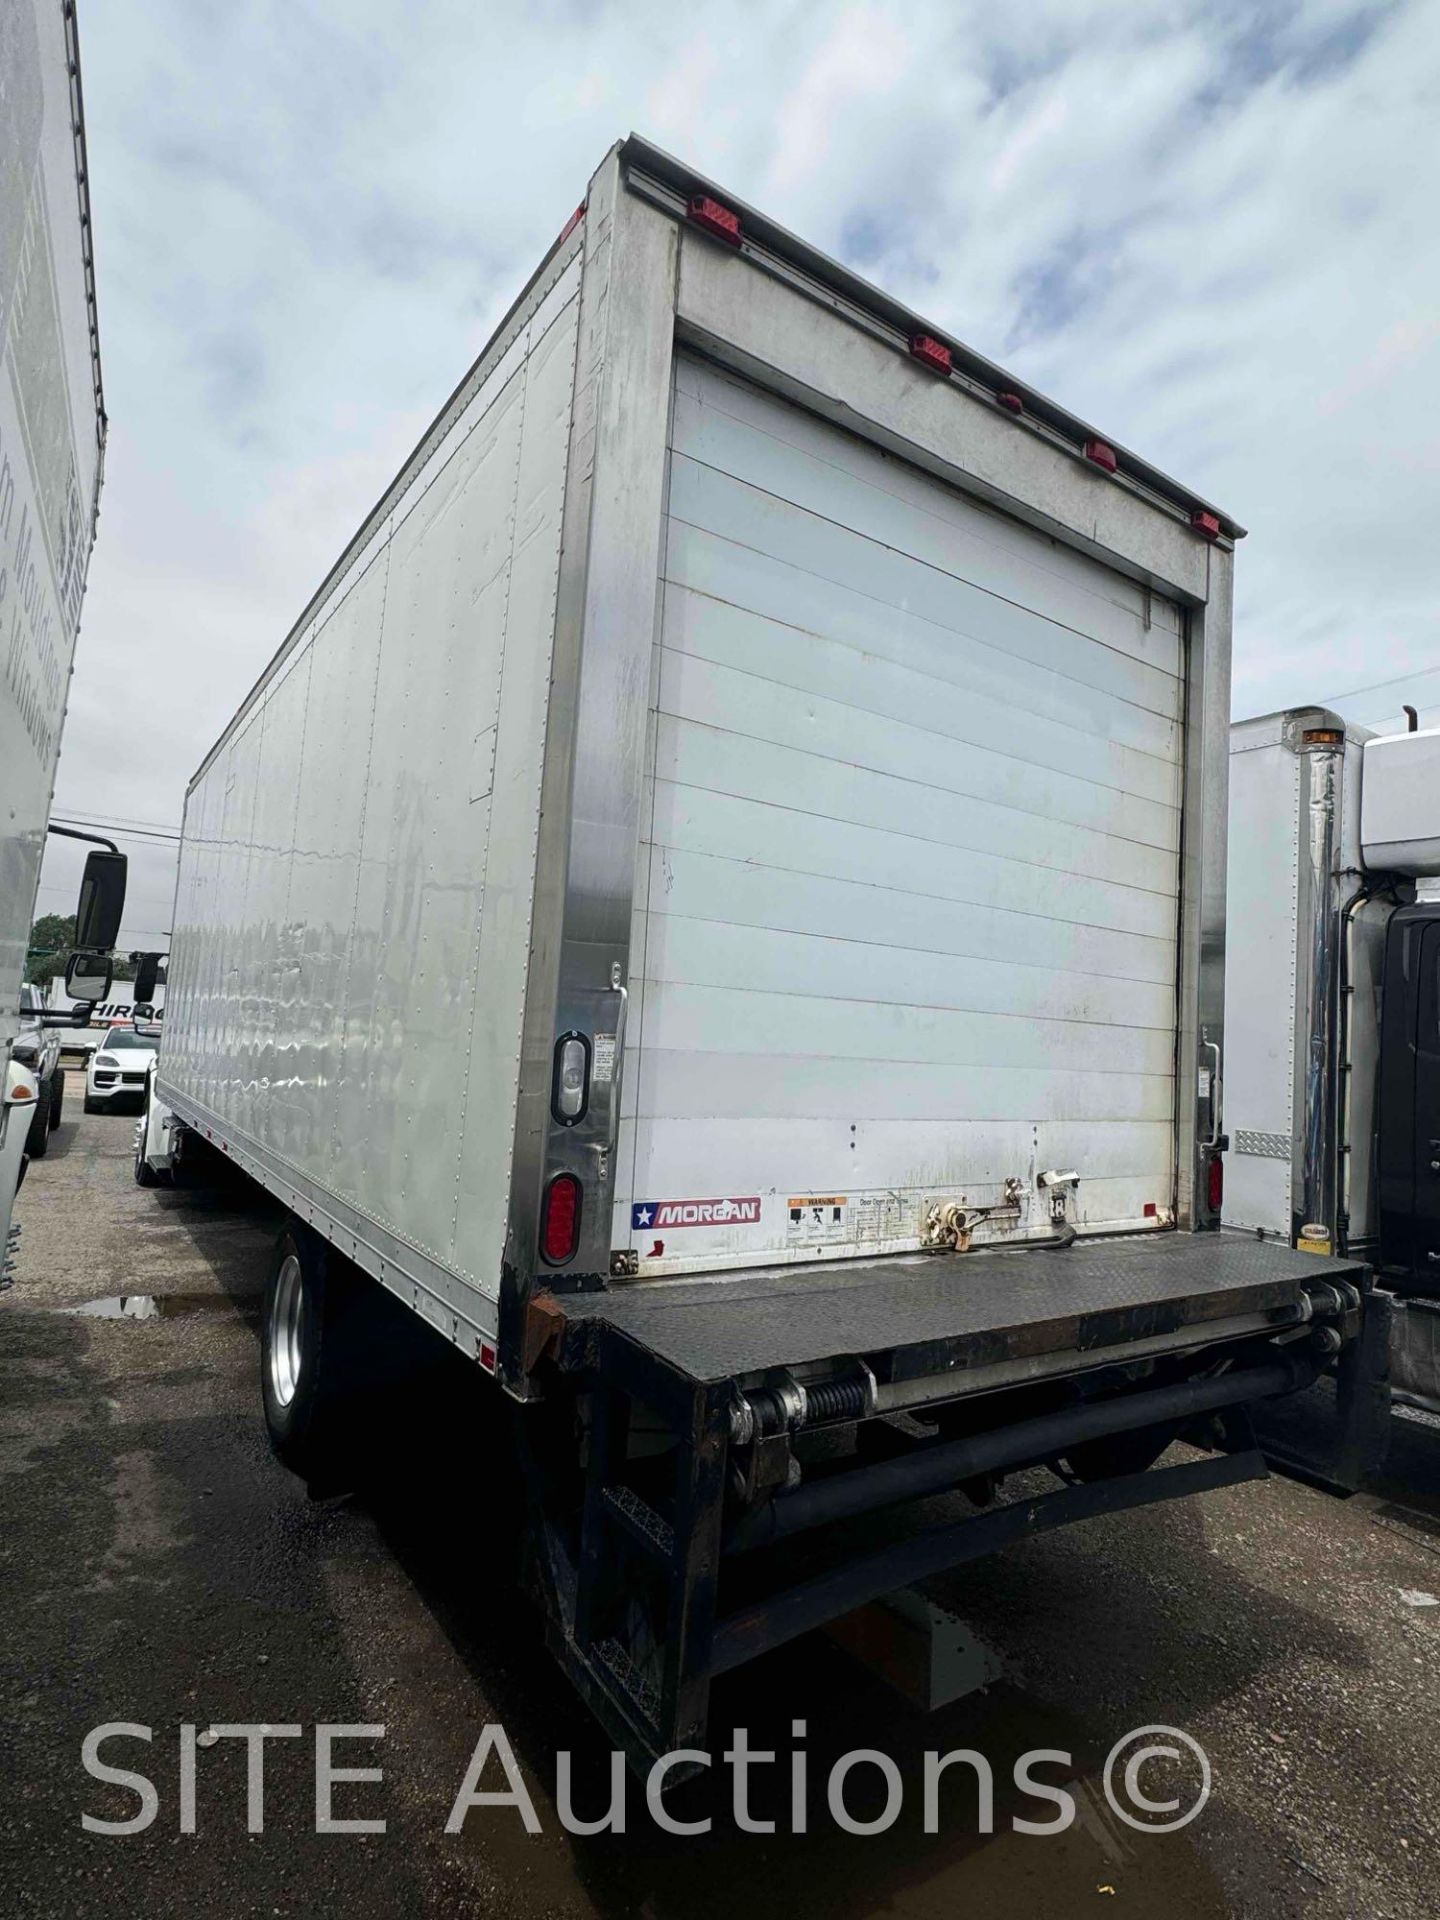 2012 Freightliner M2 Business S/A Reefer Truck - Image 5 of 34